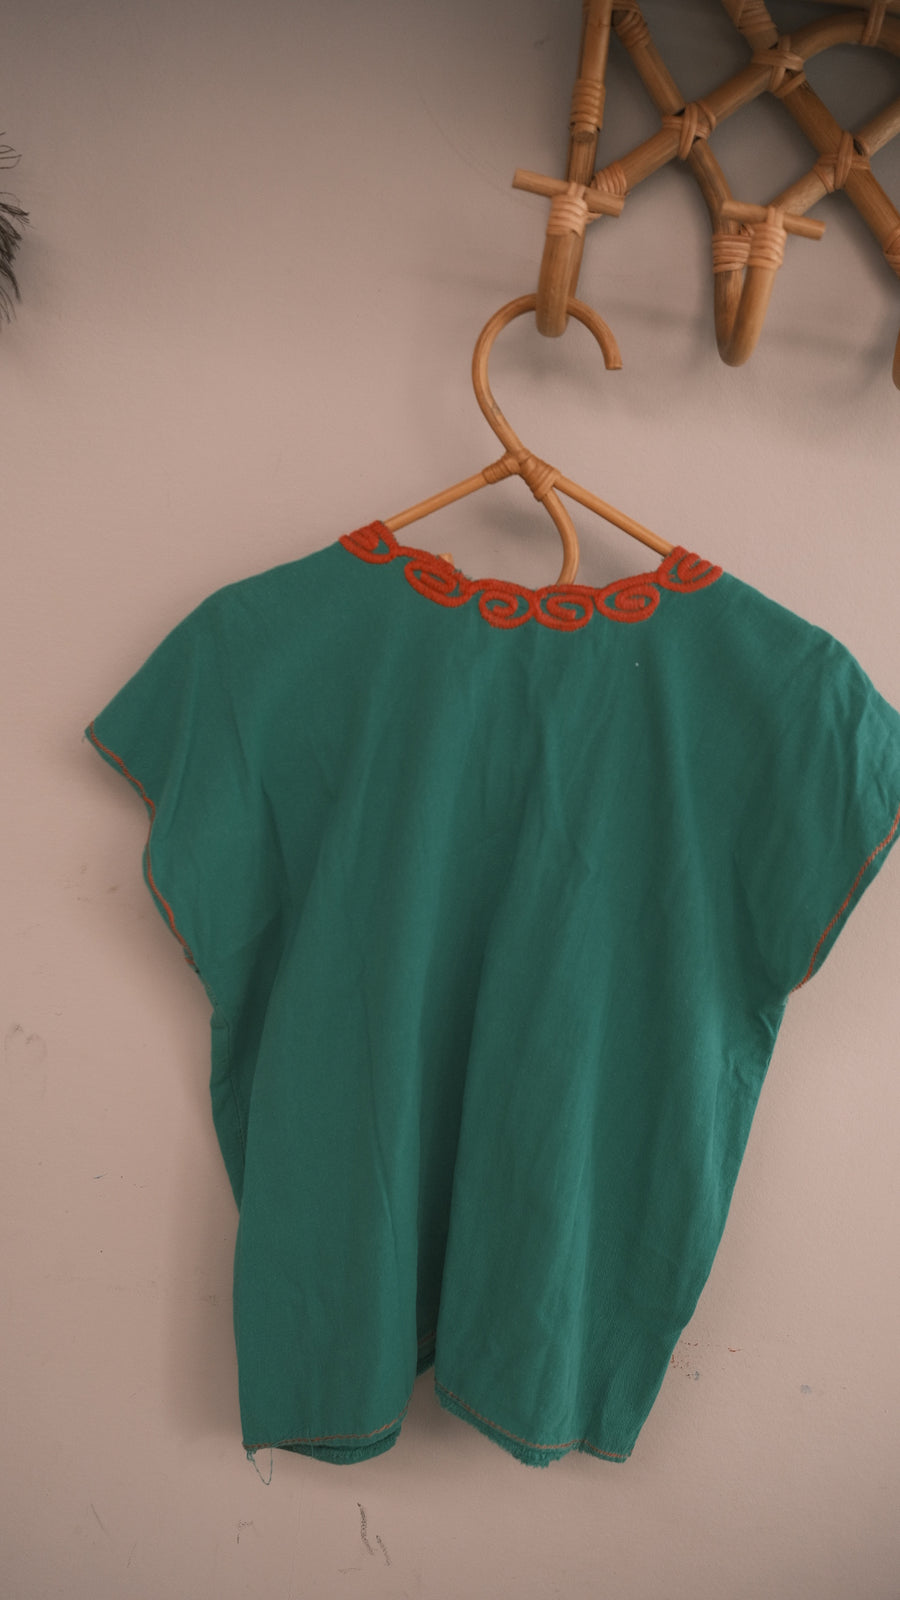 Embroidered Mexican blouse size Large